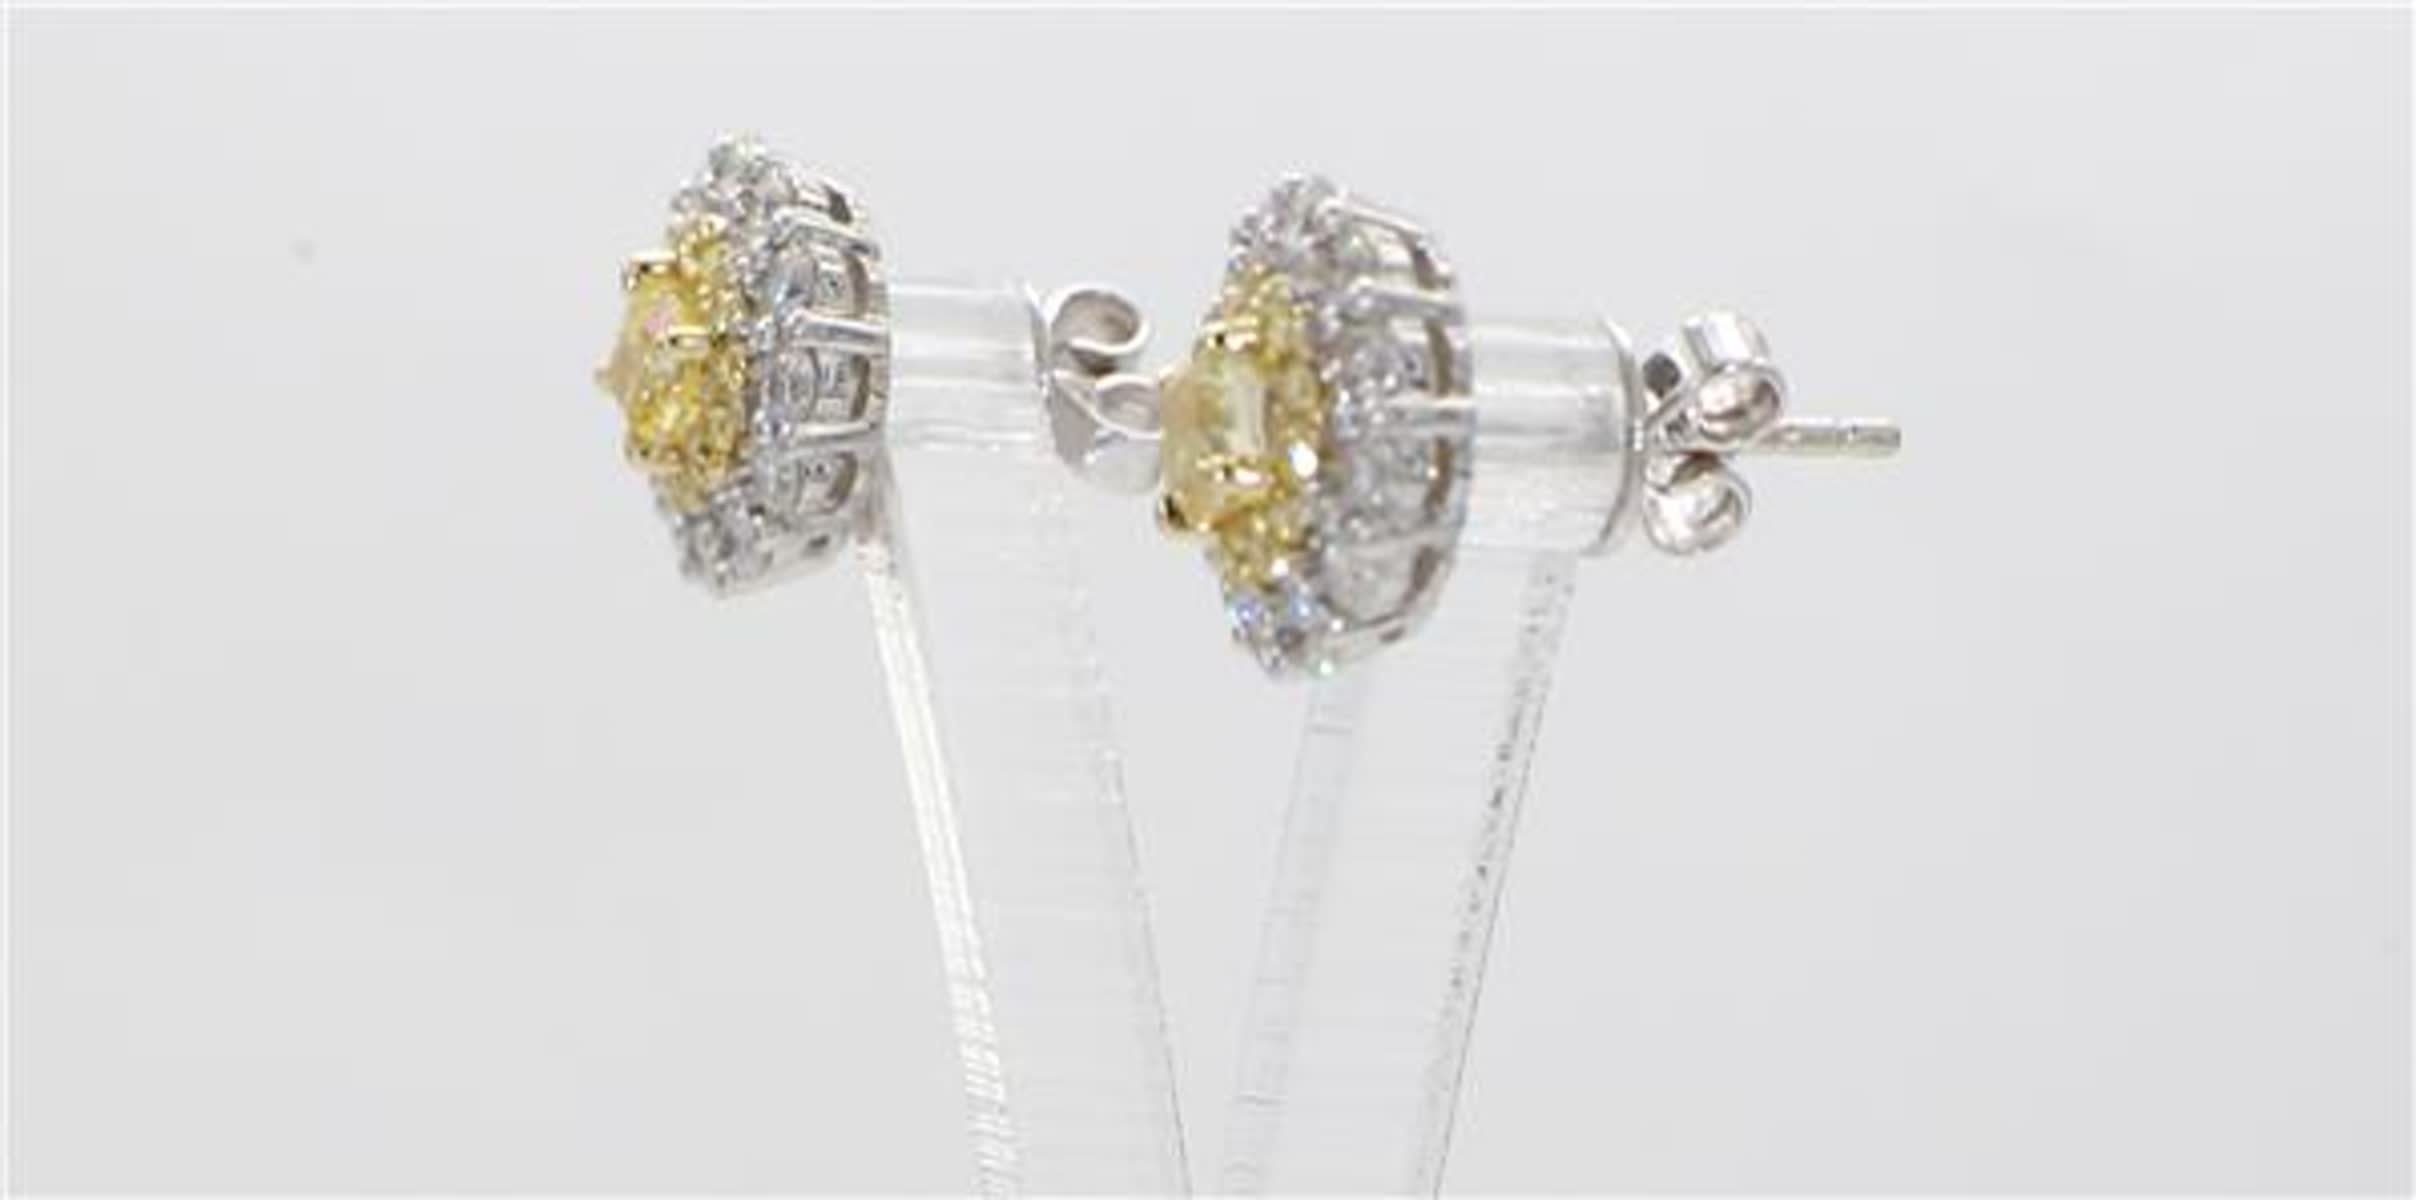 Natural Yellow Cushion and White Diamond 1.28 Carat TW Gold Stud Earrings